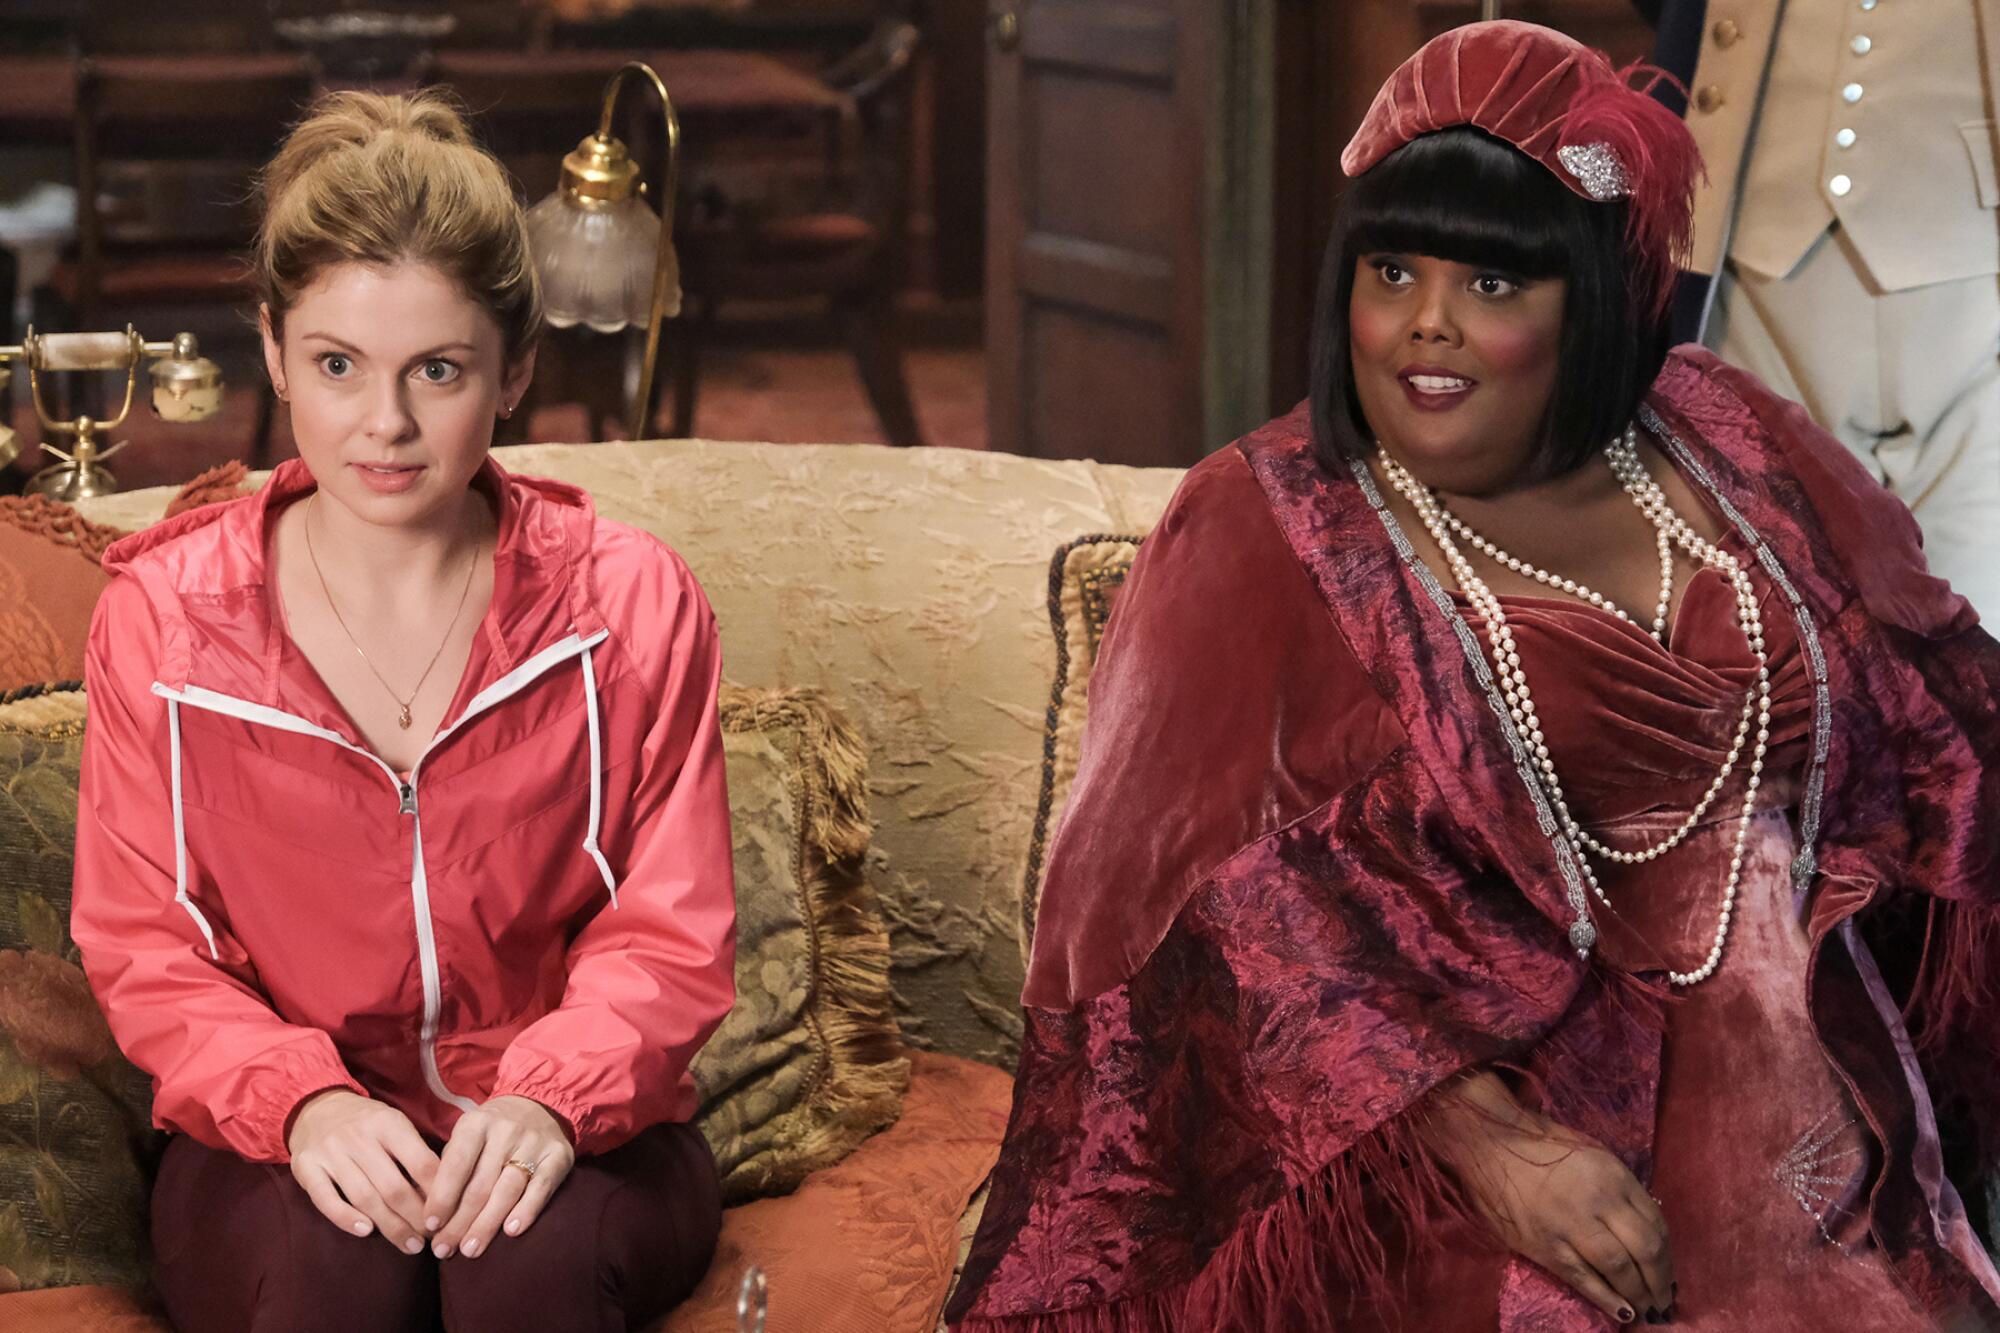 Rose McIver, left, and Danielle Pinnock in "Ghosts" on CBS.